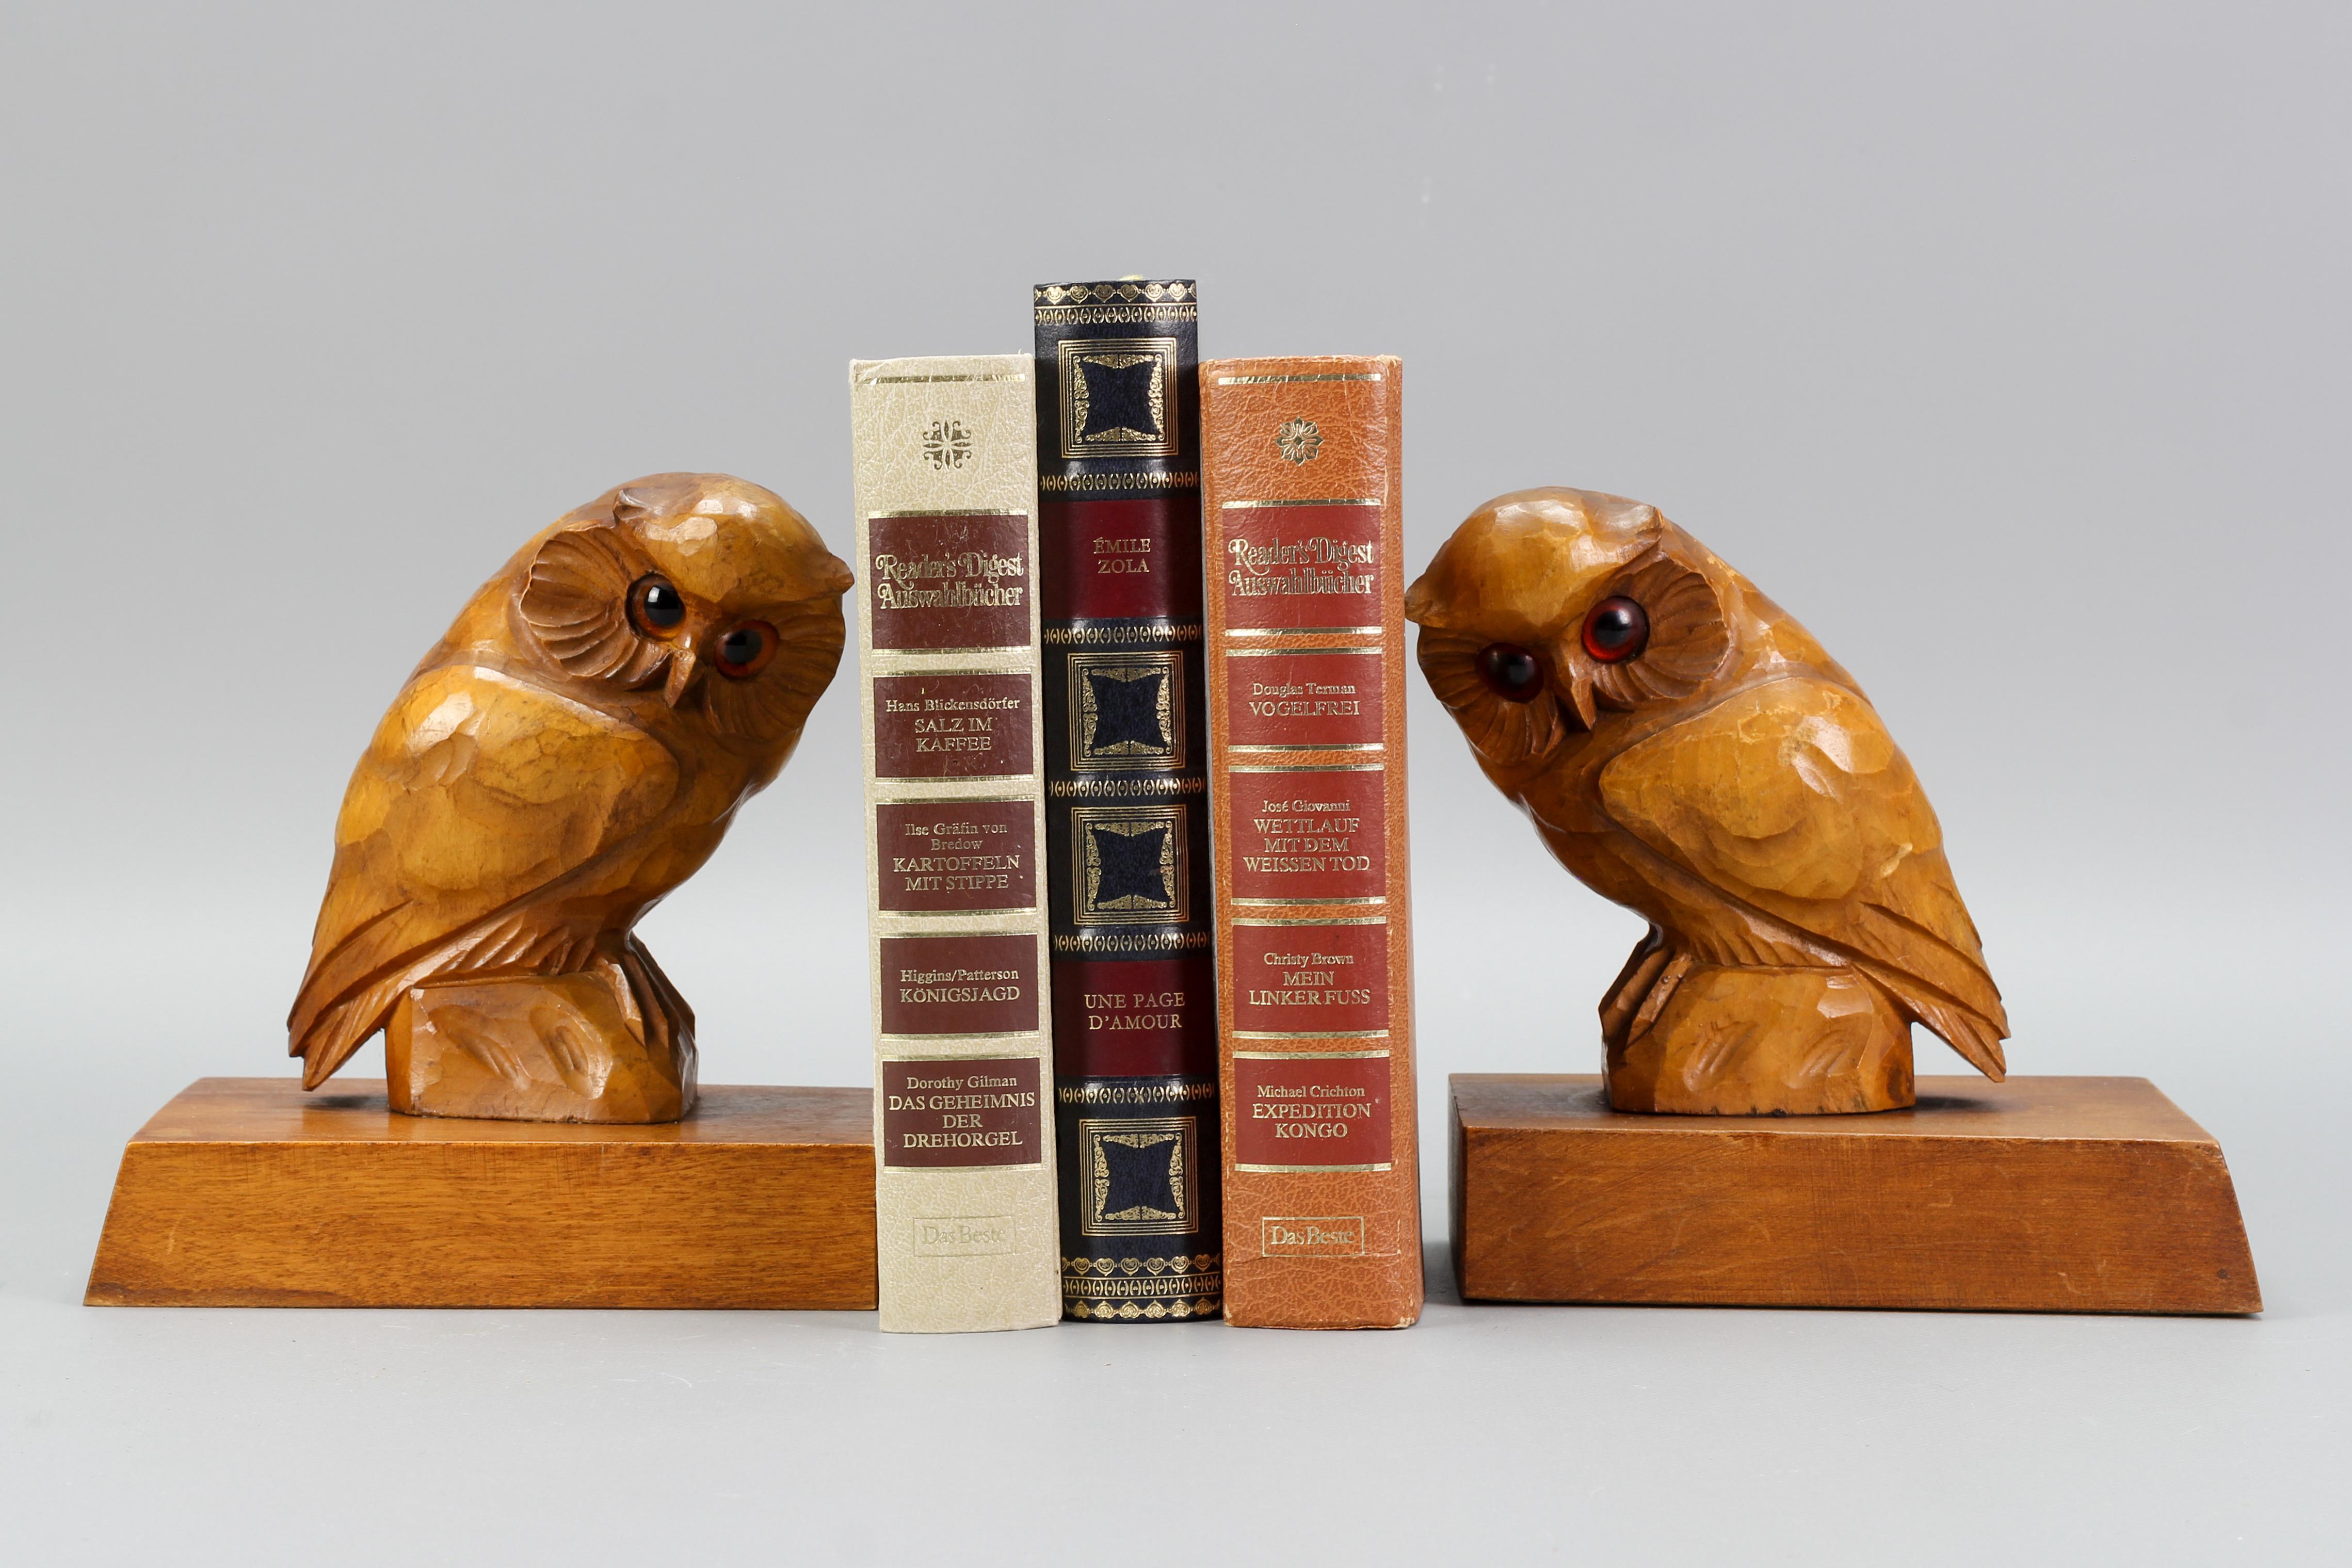 A charming pair of linden wood bookends with carved figurines of Owls with beautiful orange eyes, Germany, circa the 1930s.
These adorable bookends will make a wonderful accent on a bookshelf, mantel, or console table. Ideal gift for any owl lover